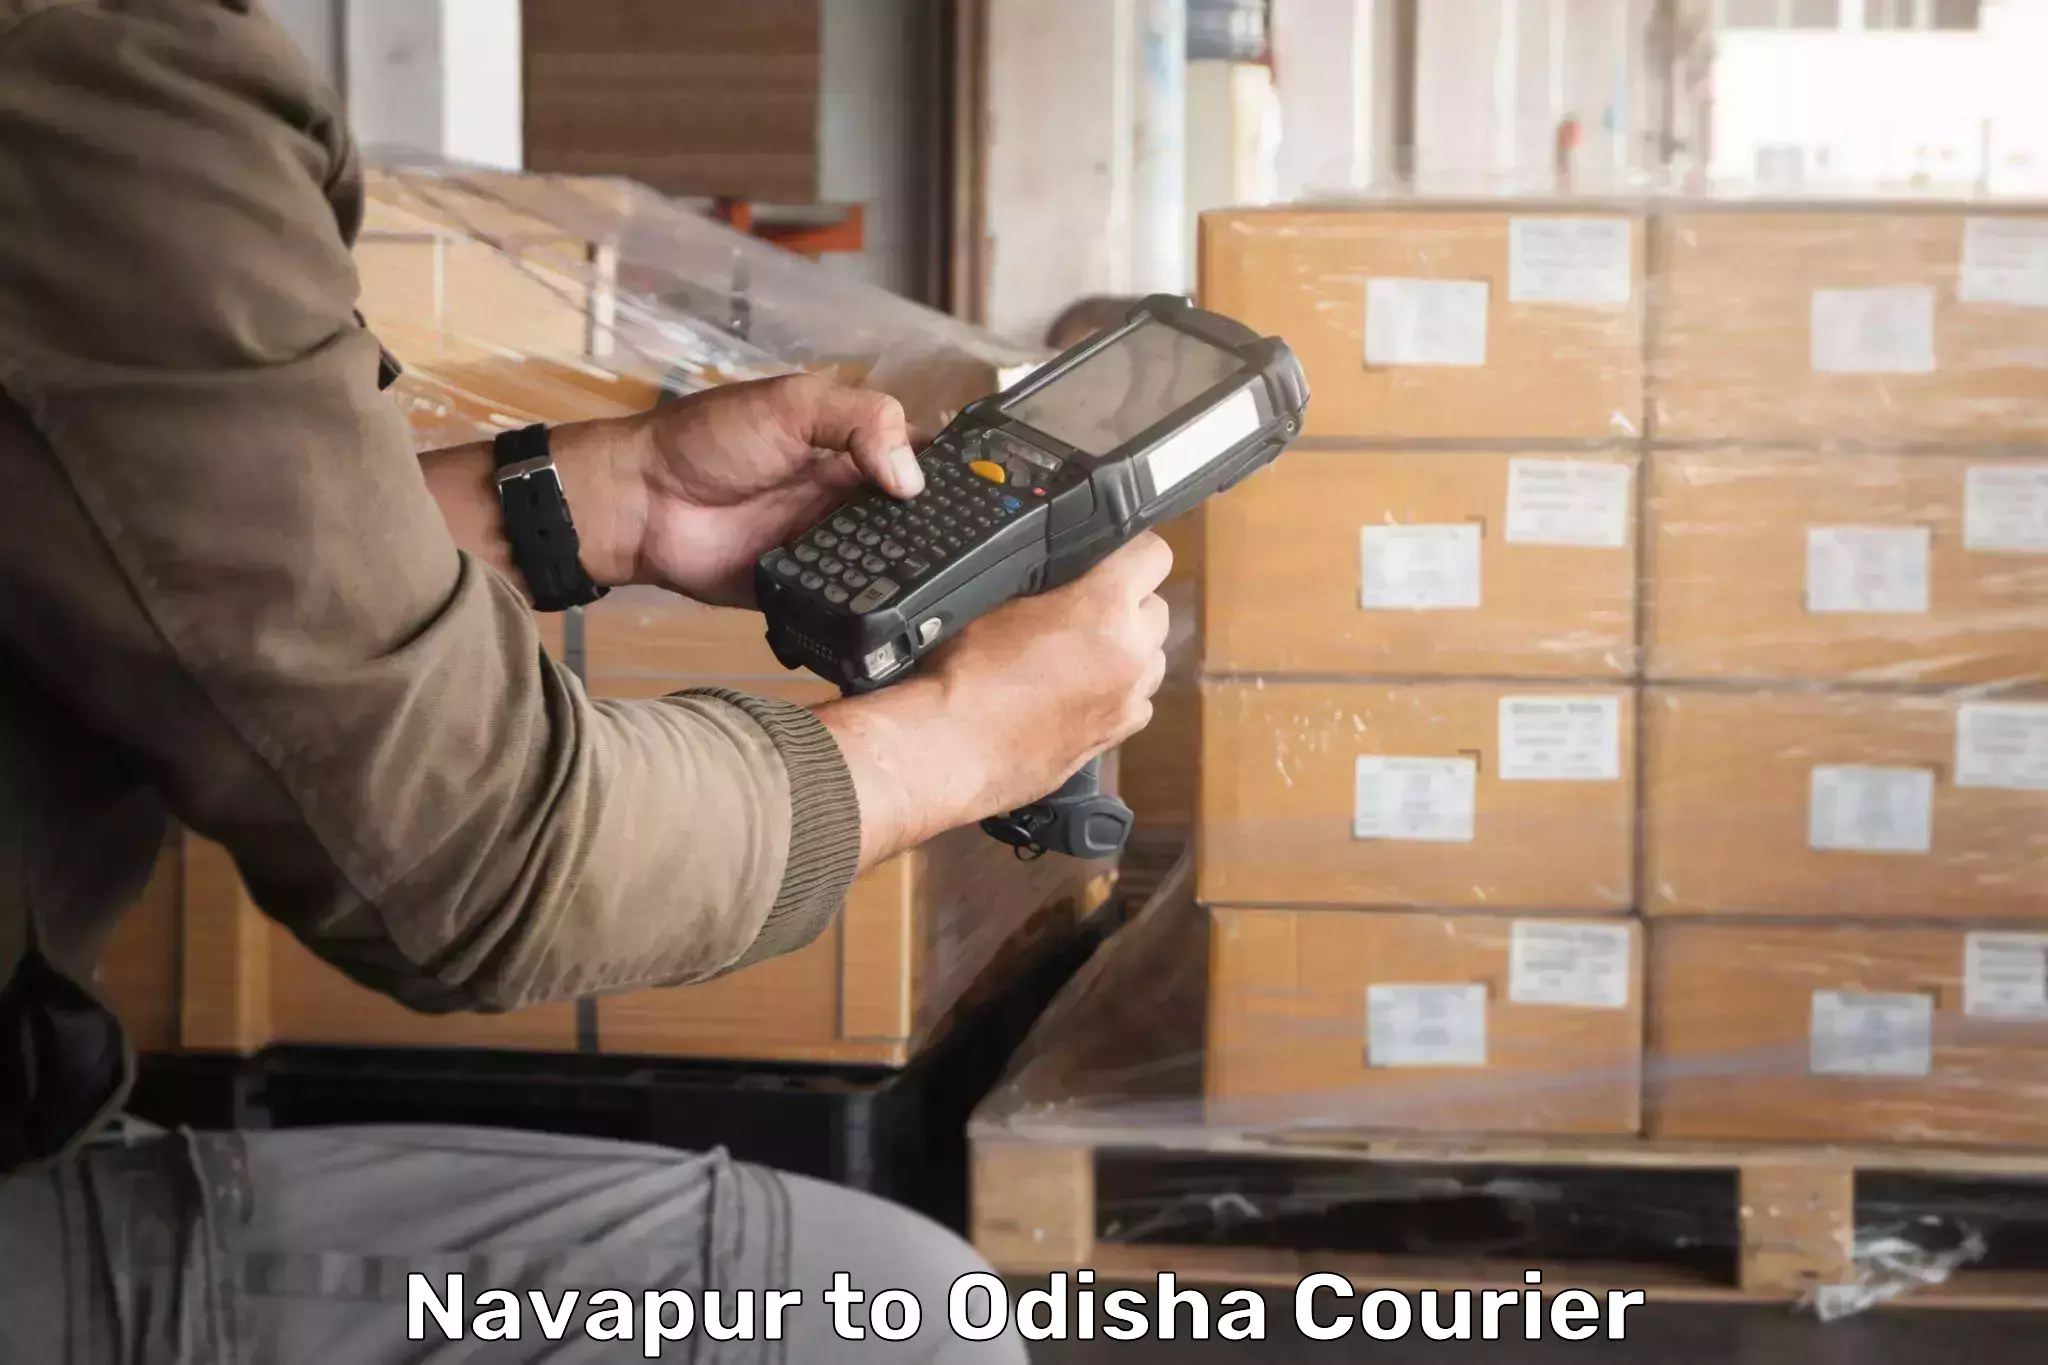 Small parcel delivery in Navapur to Puri